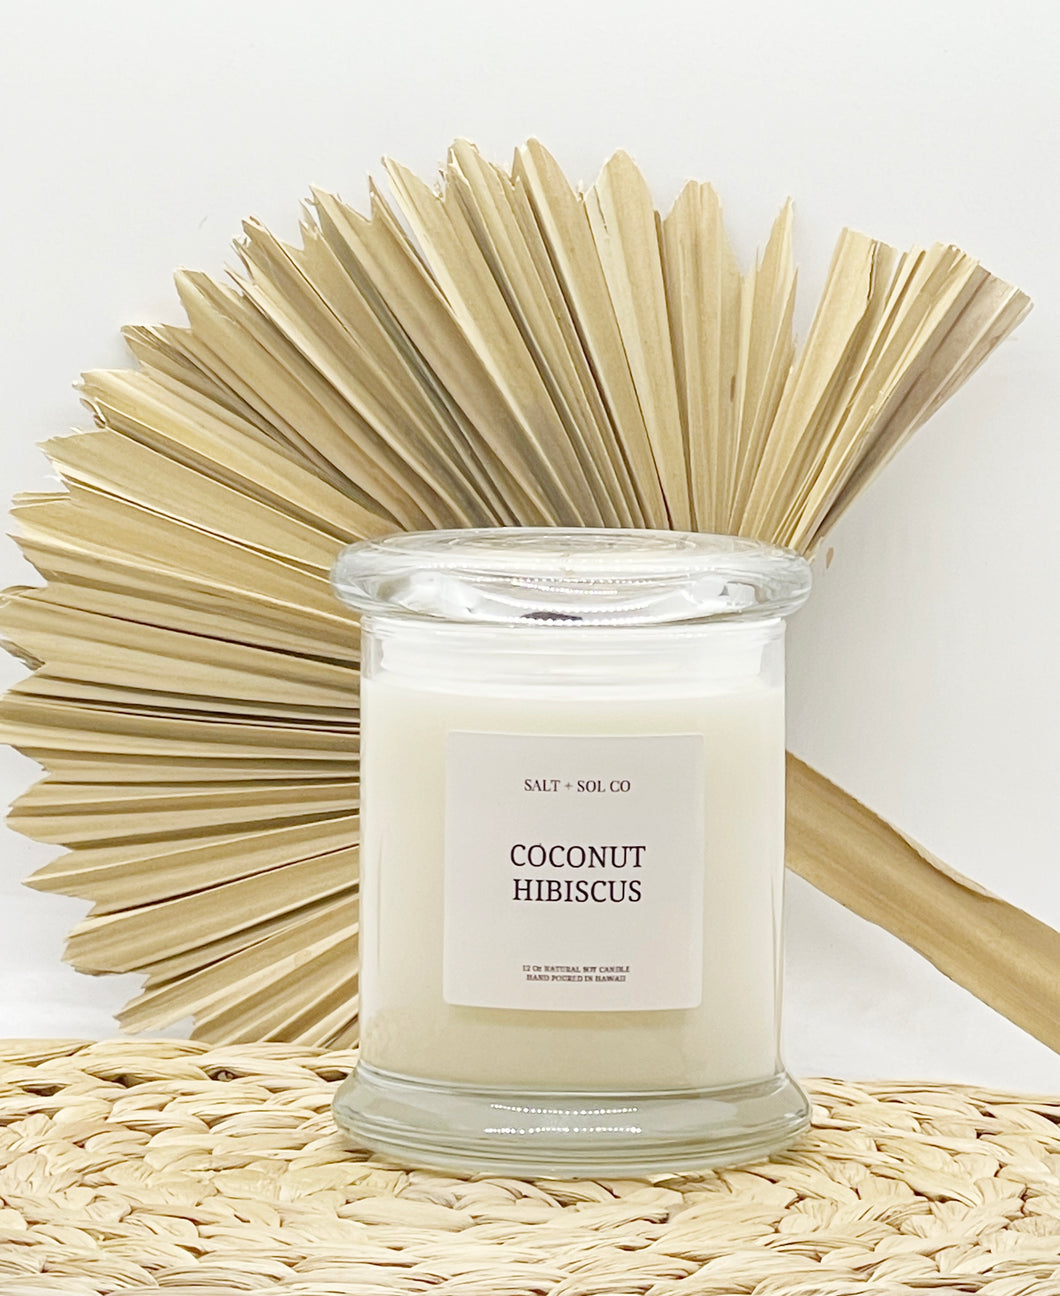 Coconut hibiscus pure soy wax candles for sale at salt + SOL co candles